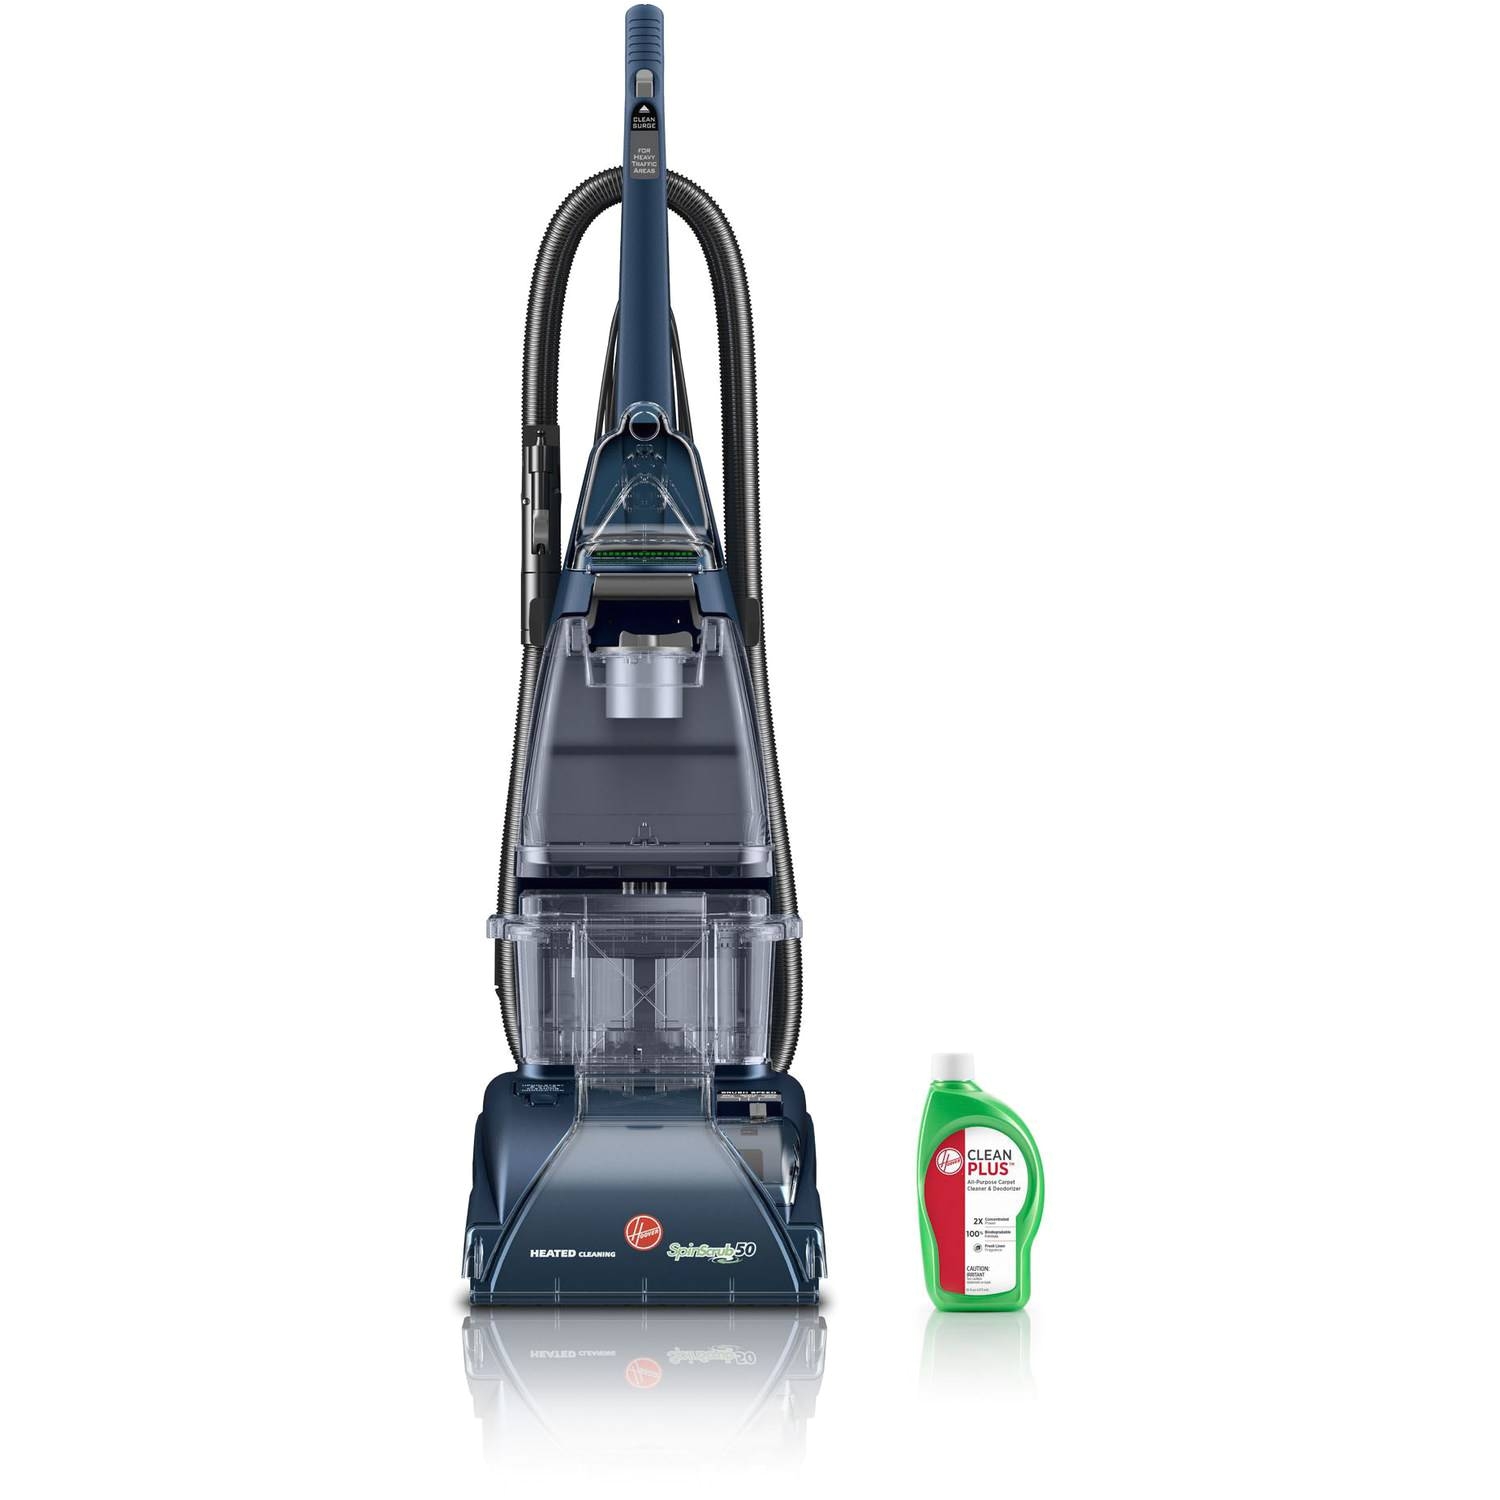 ymmv hoover steamvac spinscrub carpet cleaner 33 wal mart in store